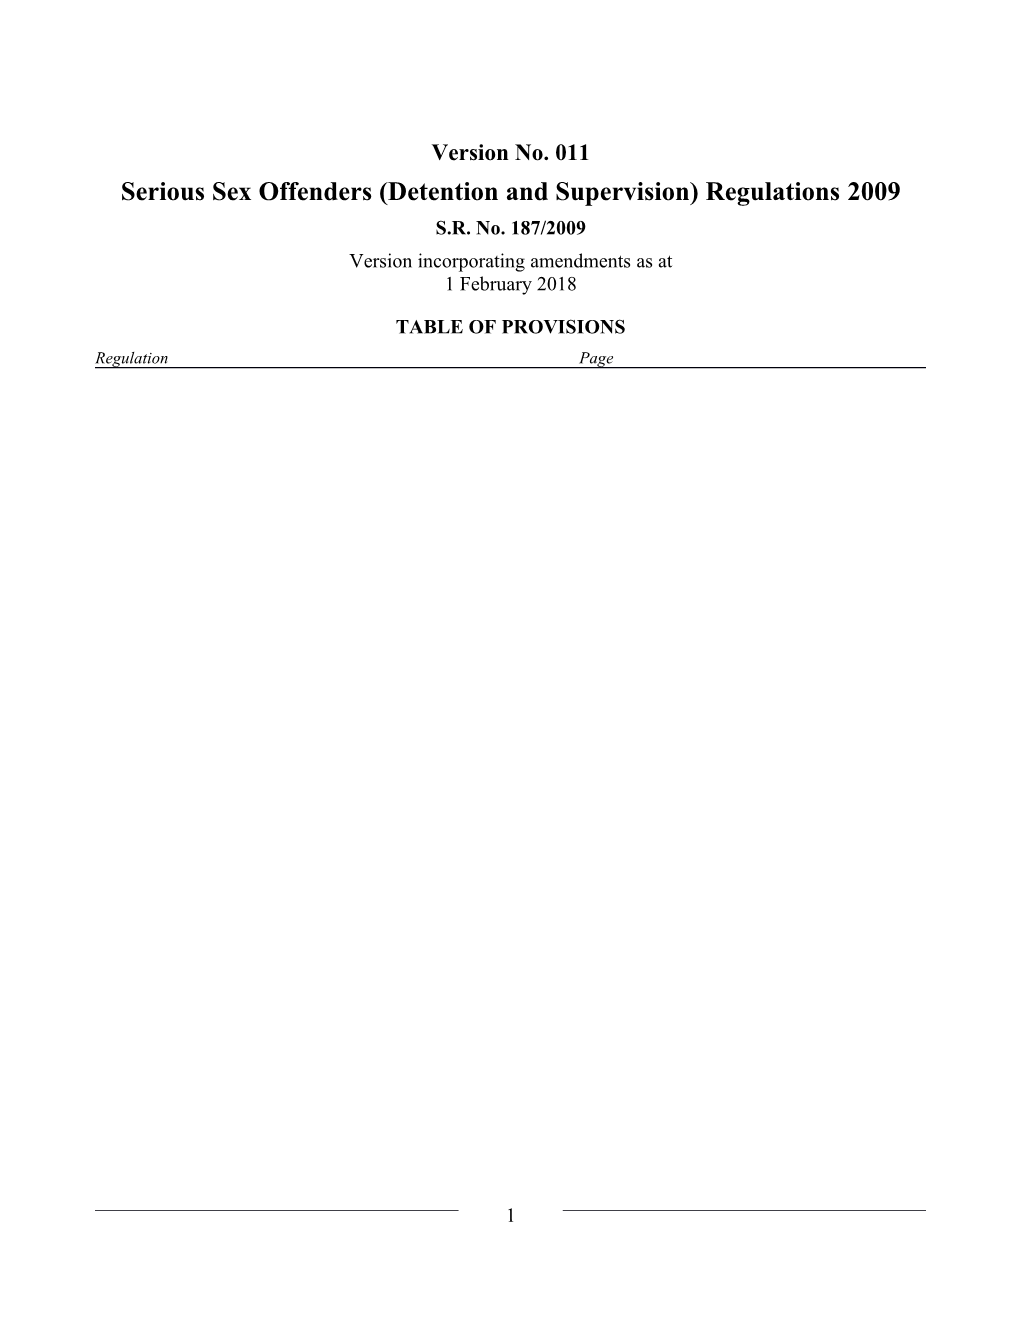 Serious Sex Offenders (Detention and Supervision) Regulations 2009